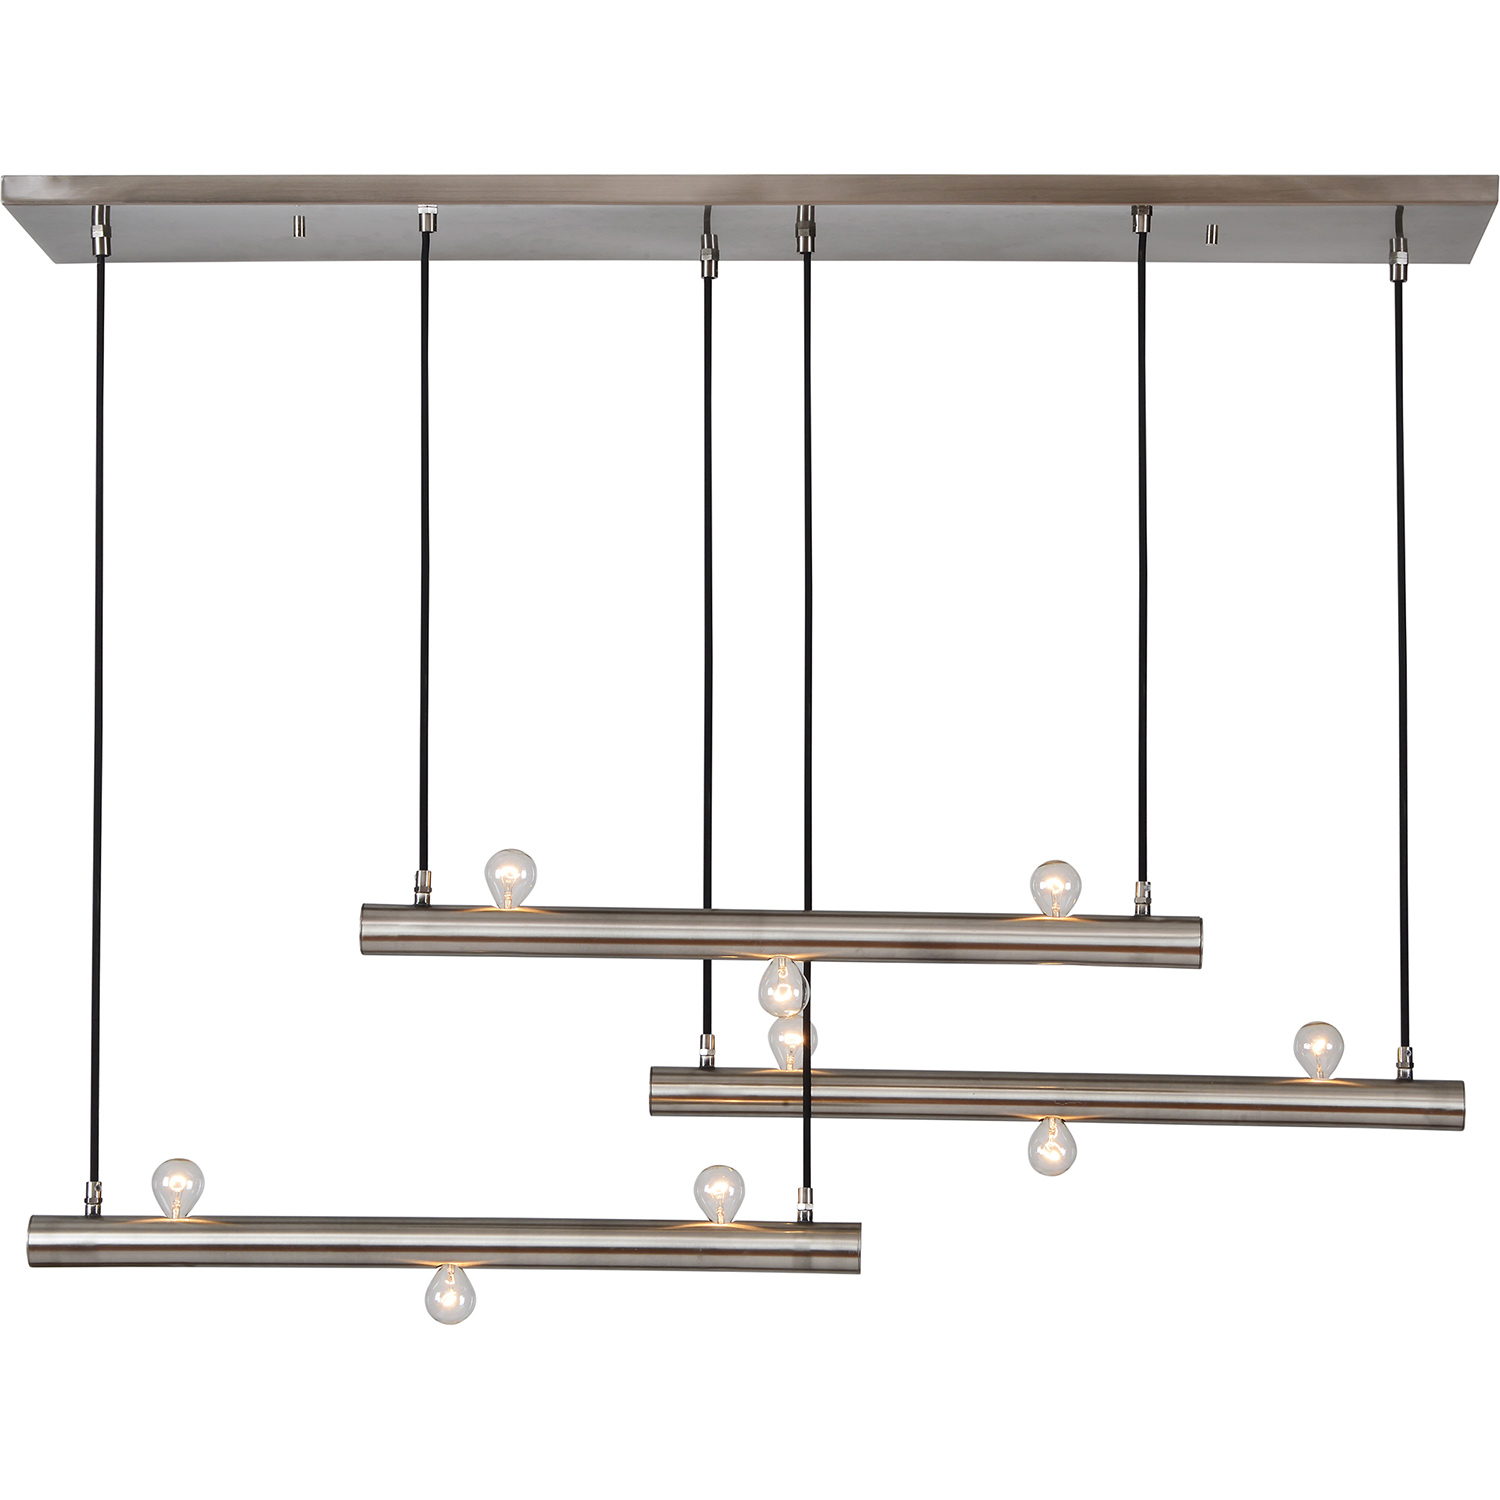 Ren-Wil Sarwood Ceiling Fixture - Pewter Plated